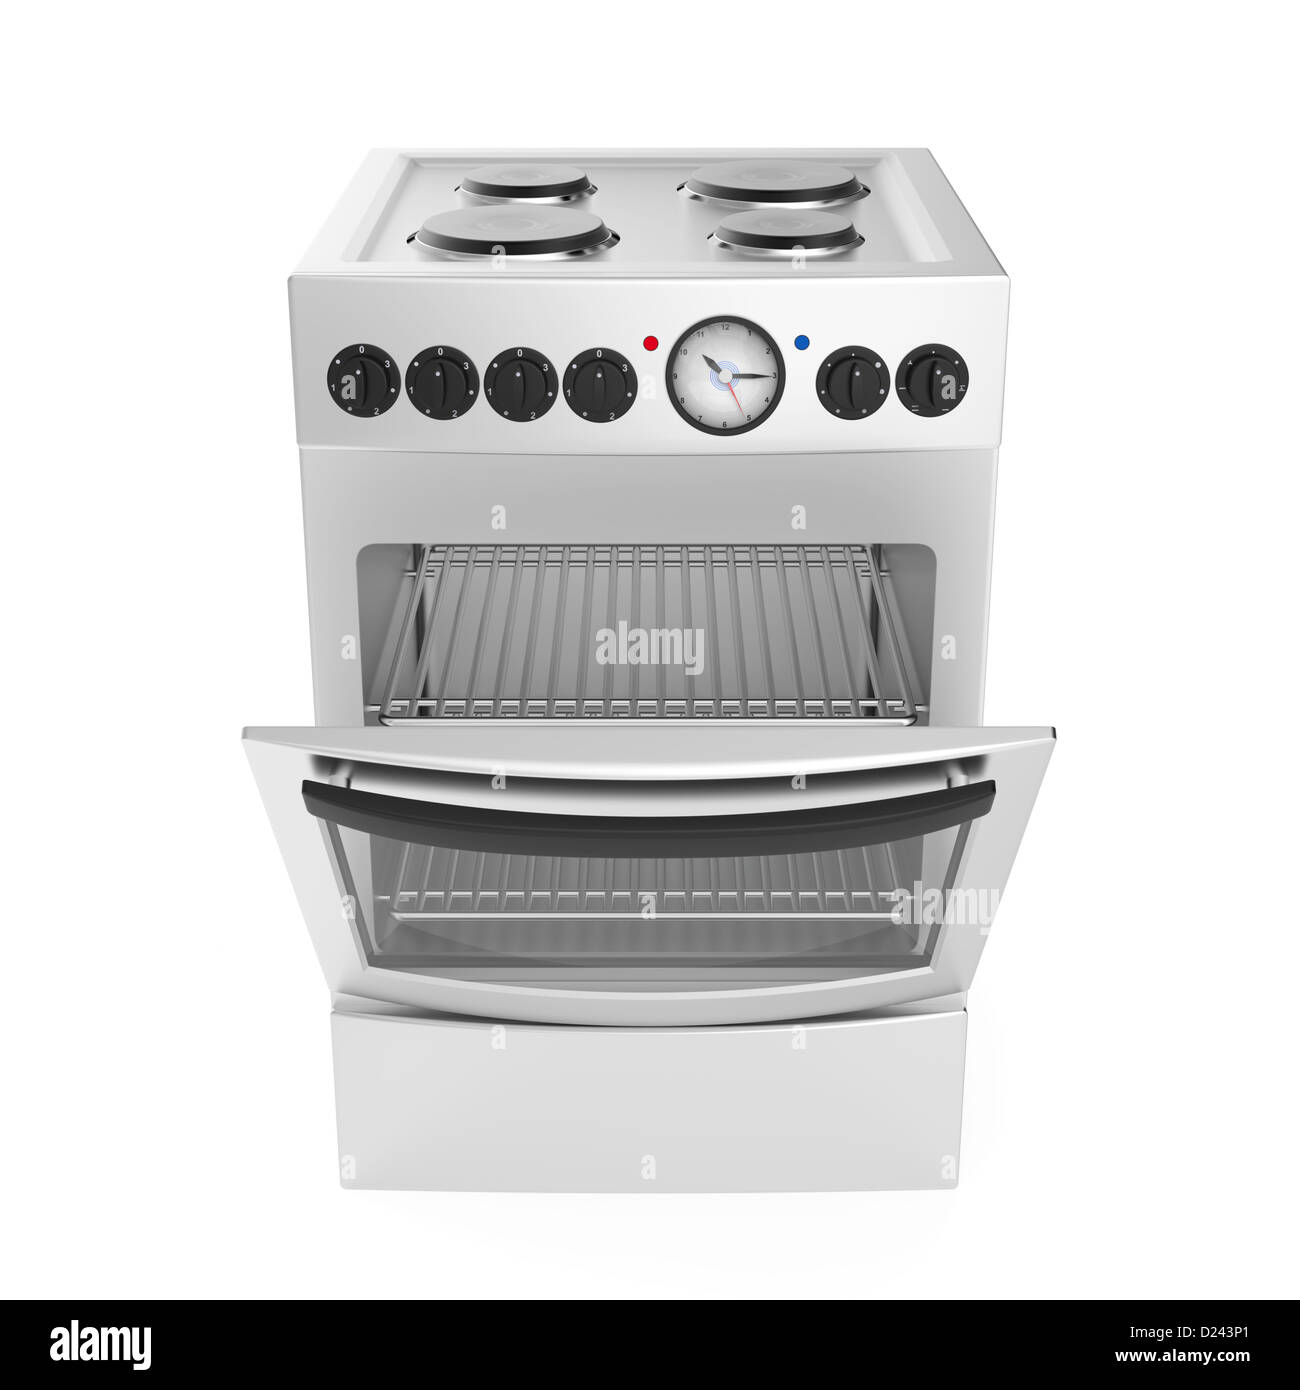 https://c8.alamy.com/comp/D243P1/inox-electric-cooker-on-white-background-D243P1.jpg